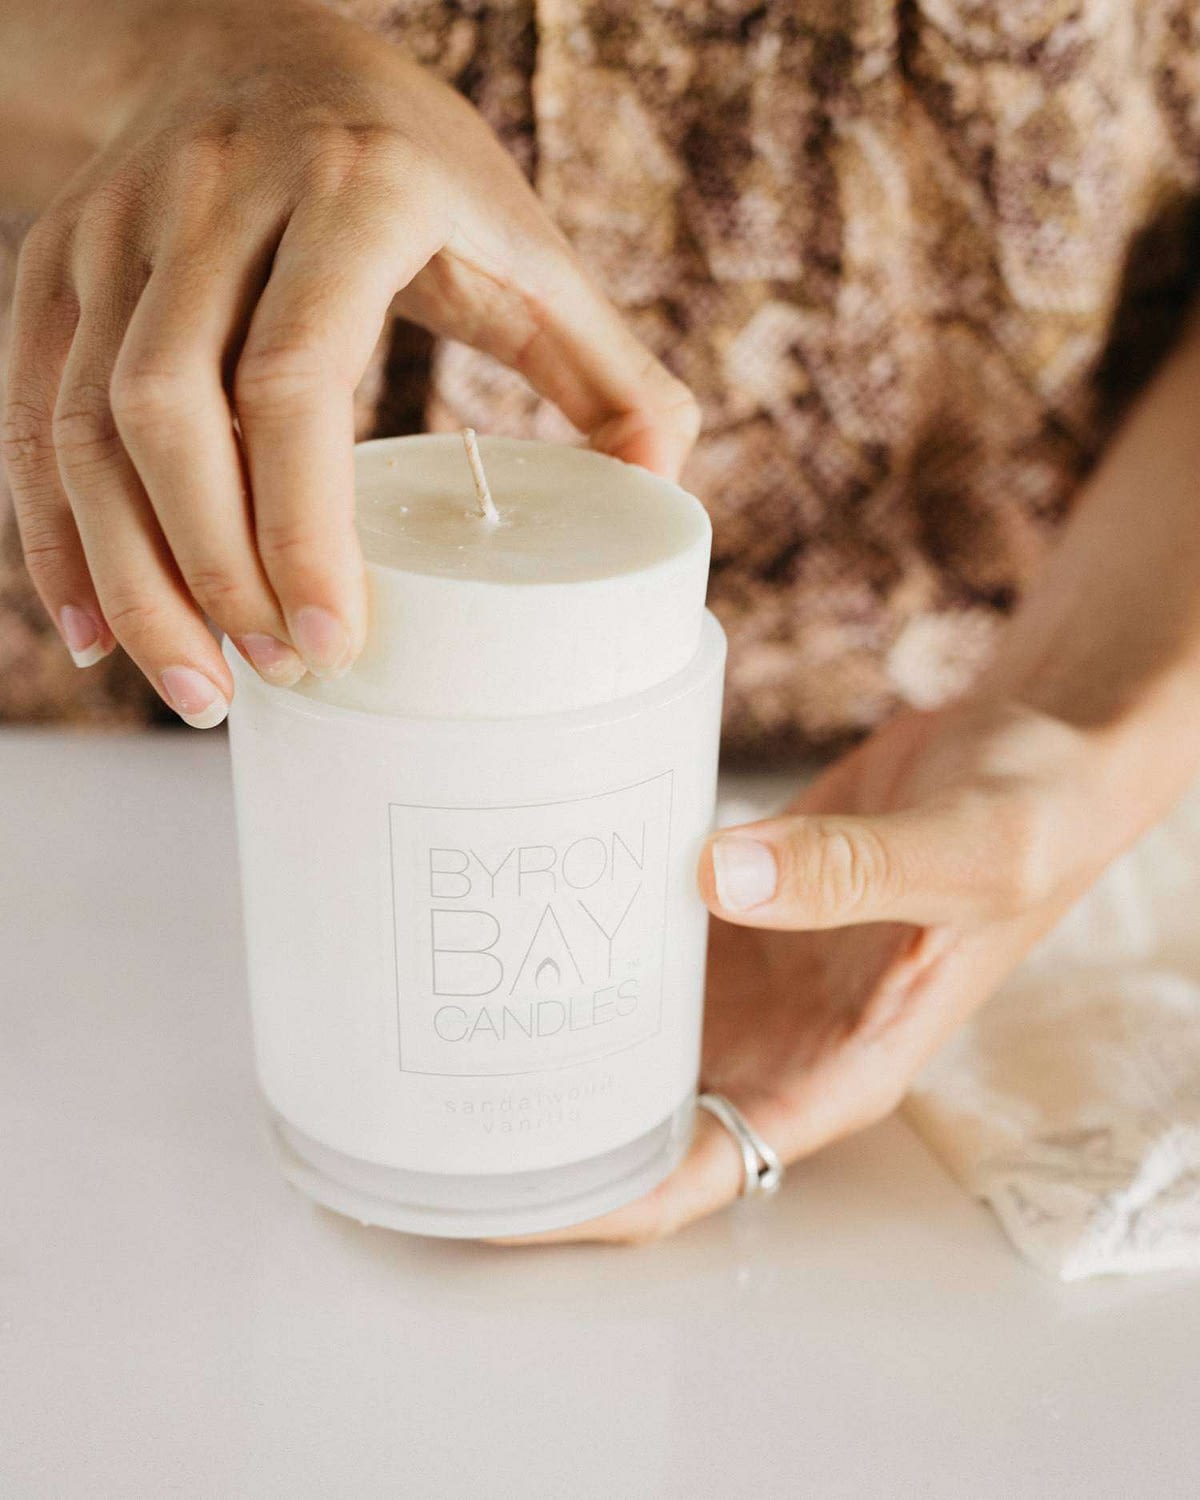 Byron_Bay_Candles_lit_candle_refill_insert